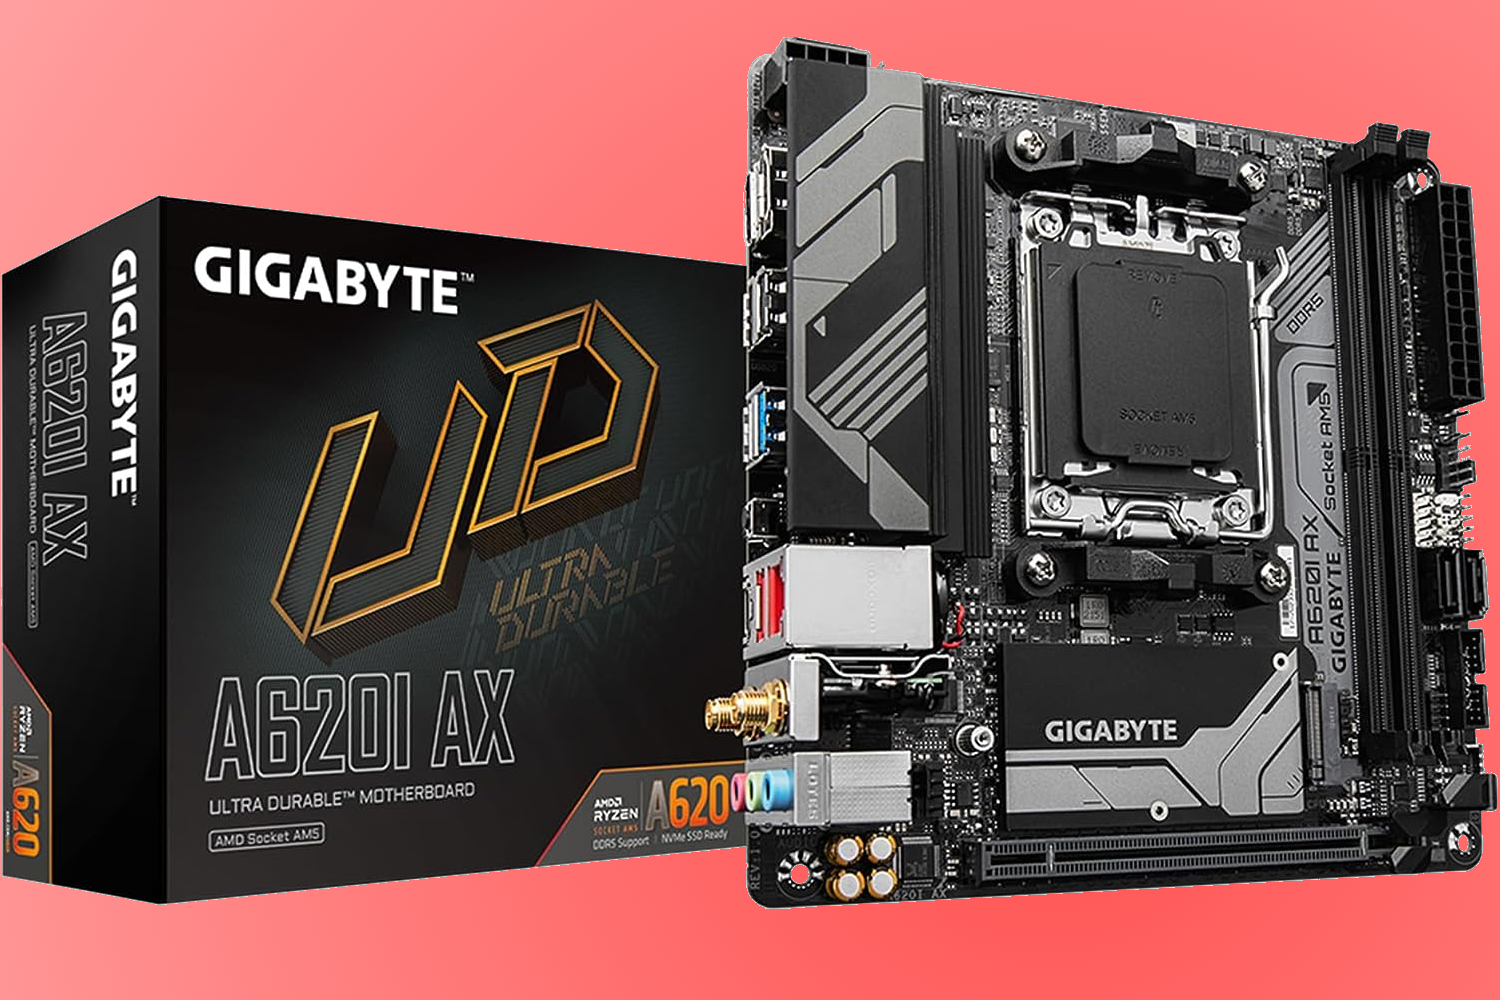 GIGABYTE A620I AX mini itx motherboard next to product packaging